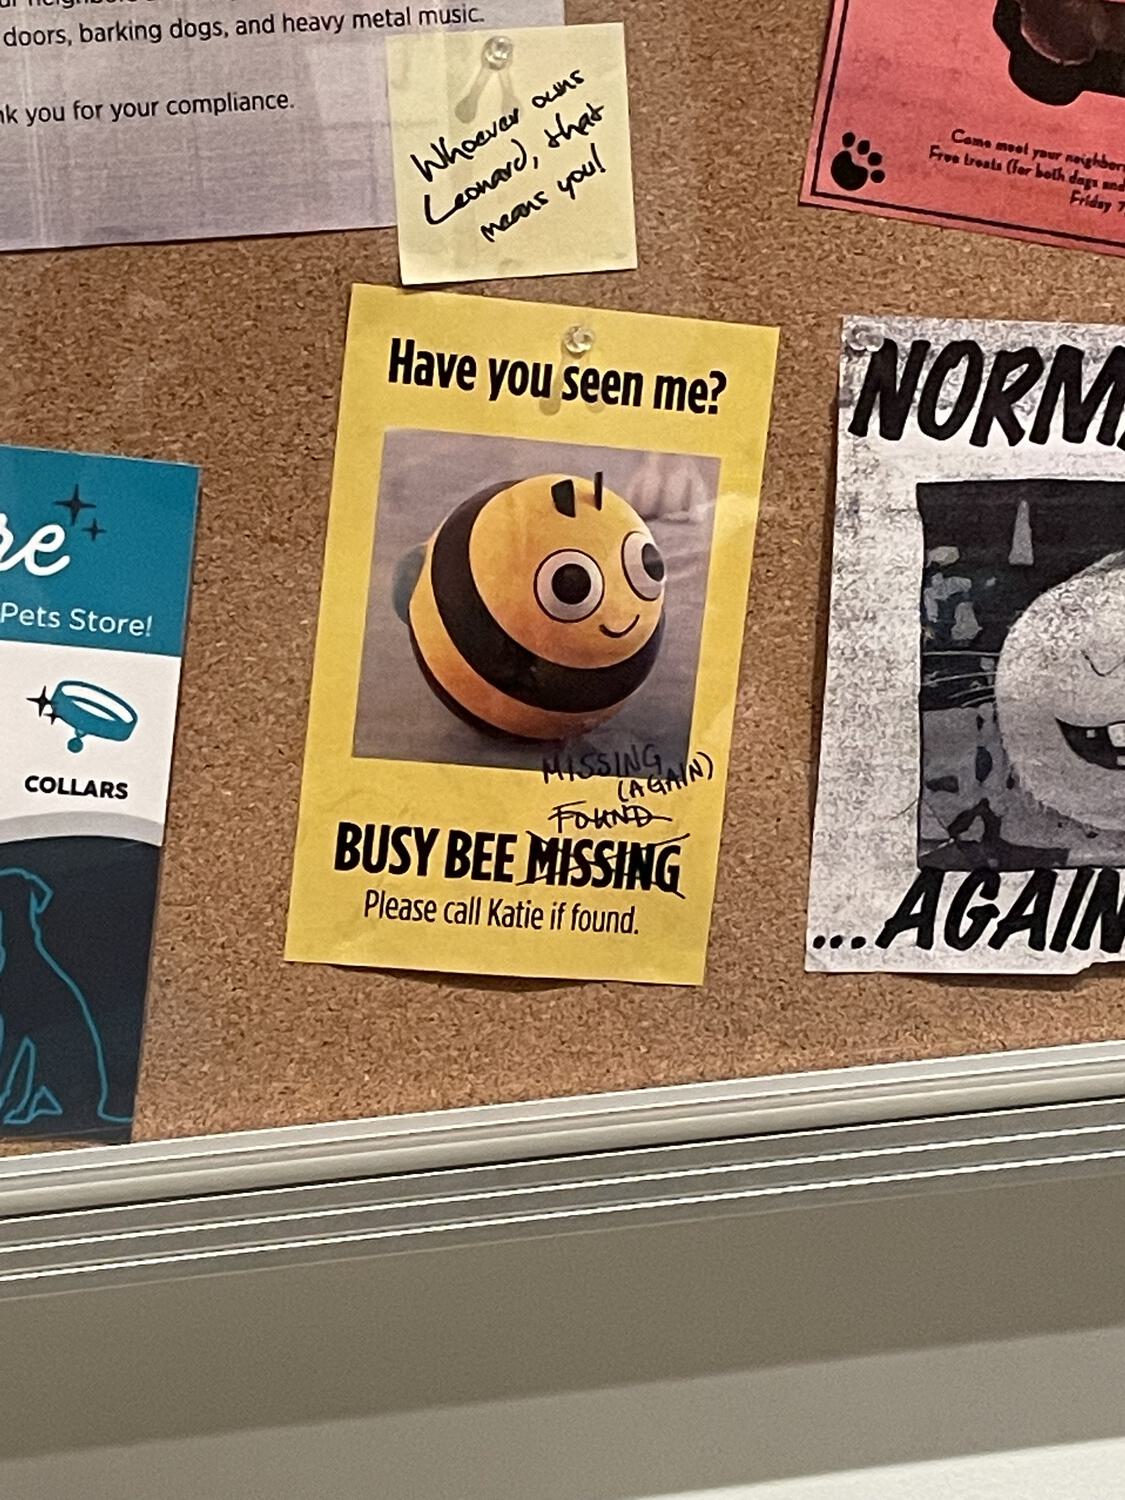 A poster on a bulletin board that reads "Have you seen me? Busy Bee Missing - Please call Katie if found." Missing is crossed out and replaced with "Found," which is also crossed out and replaced with "Missing (again)"